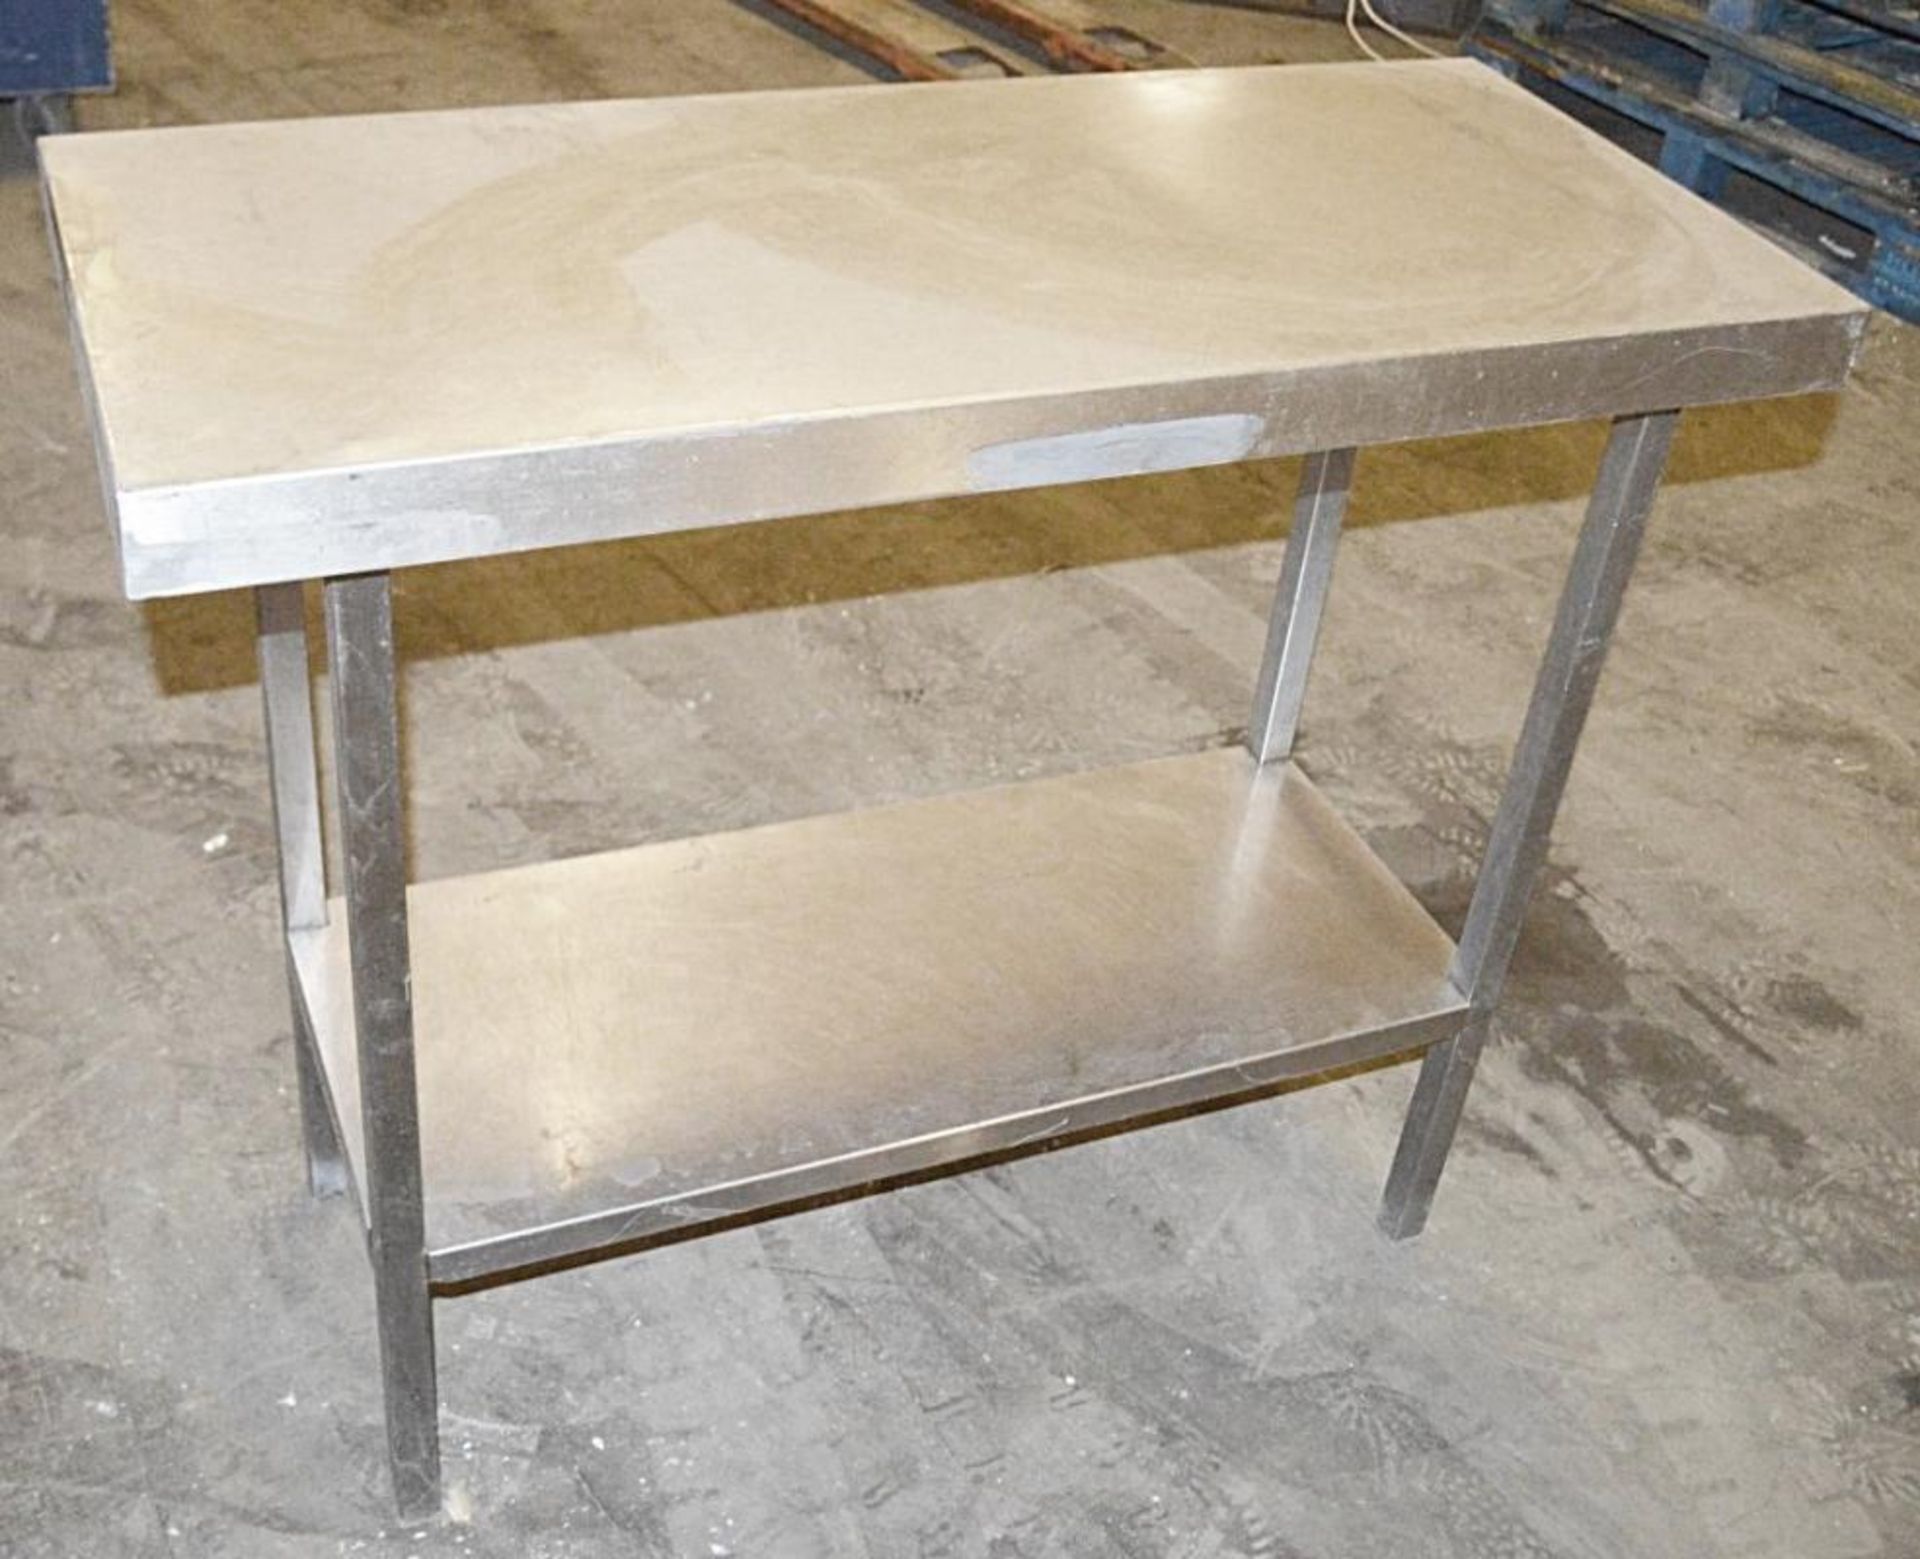 1 x Stainless Steel Prep Bench With Undersheff - Dimensions: W107 x 46 x H88cm - £1 Start, No Reserv